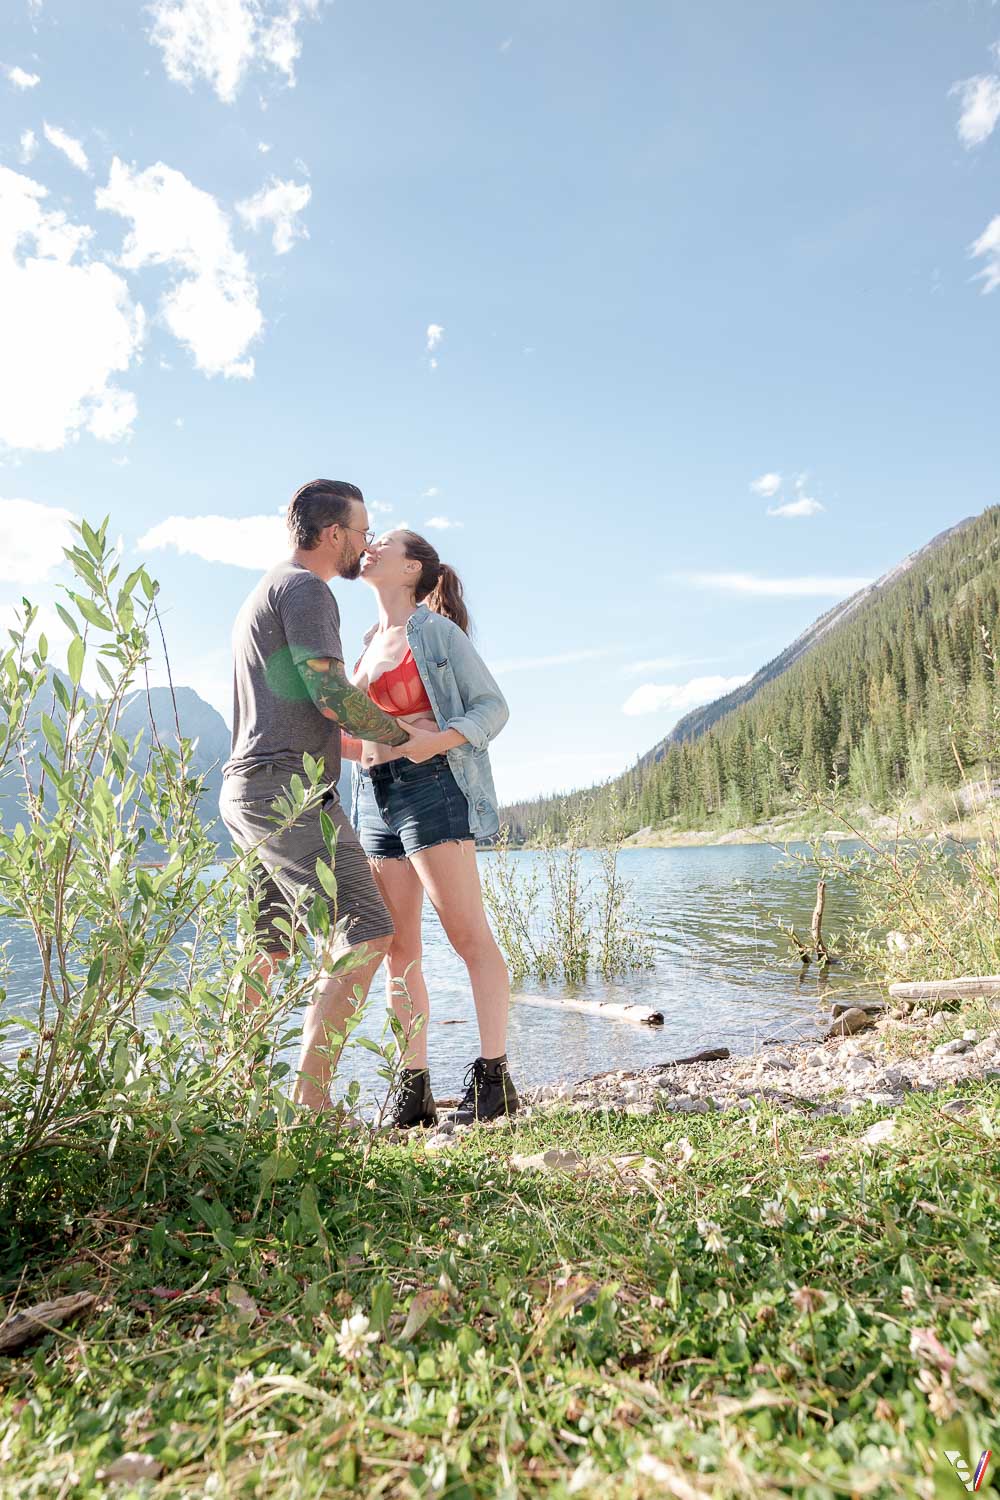 Things to do for lovers in Canadian Rockies.